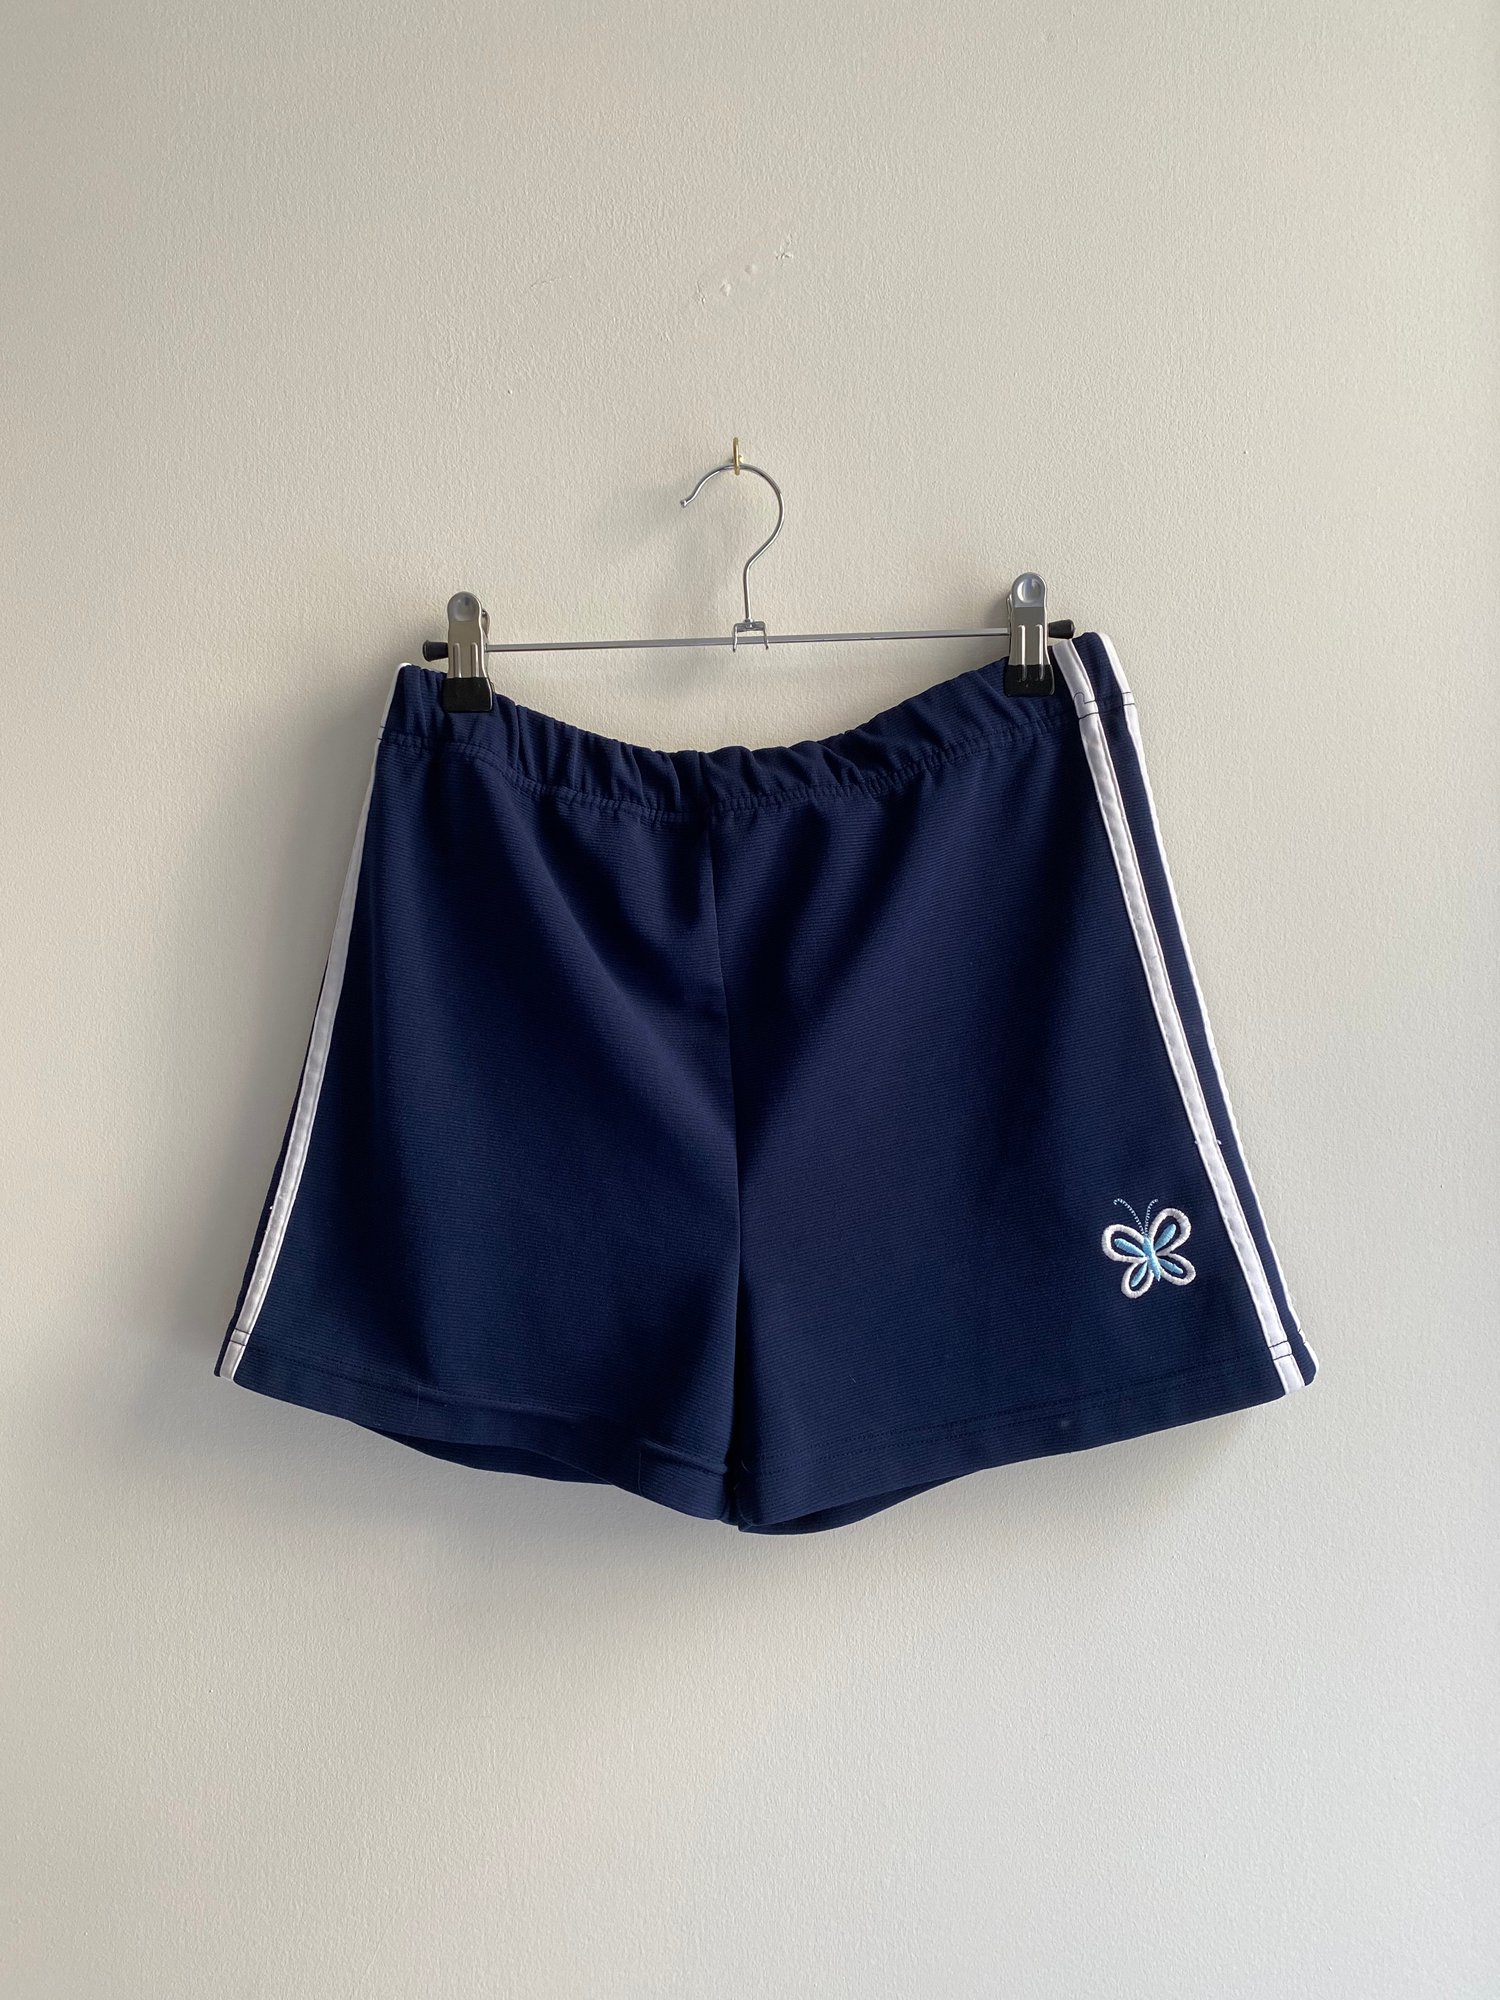 justice athletic shorts 